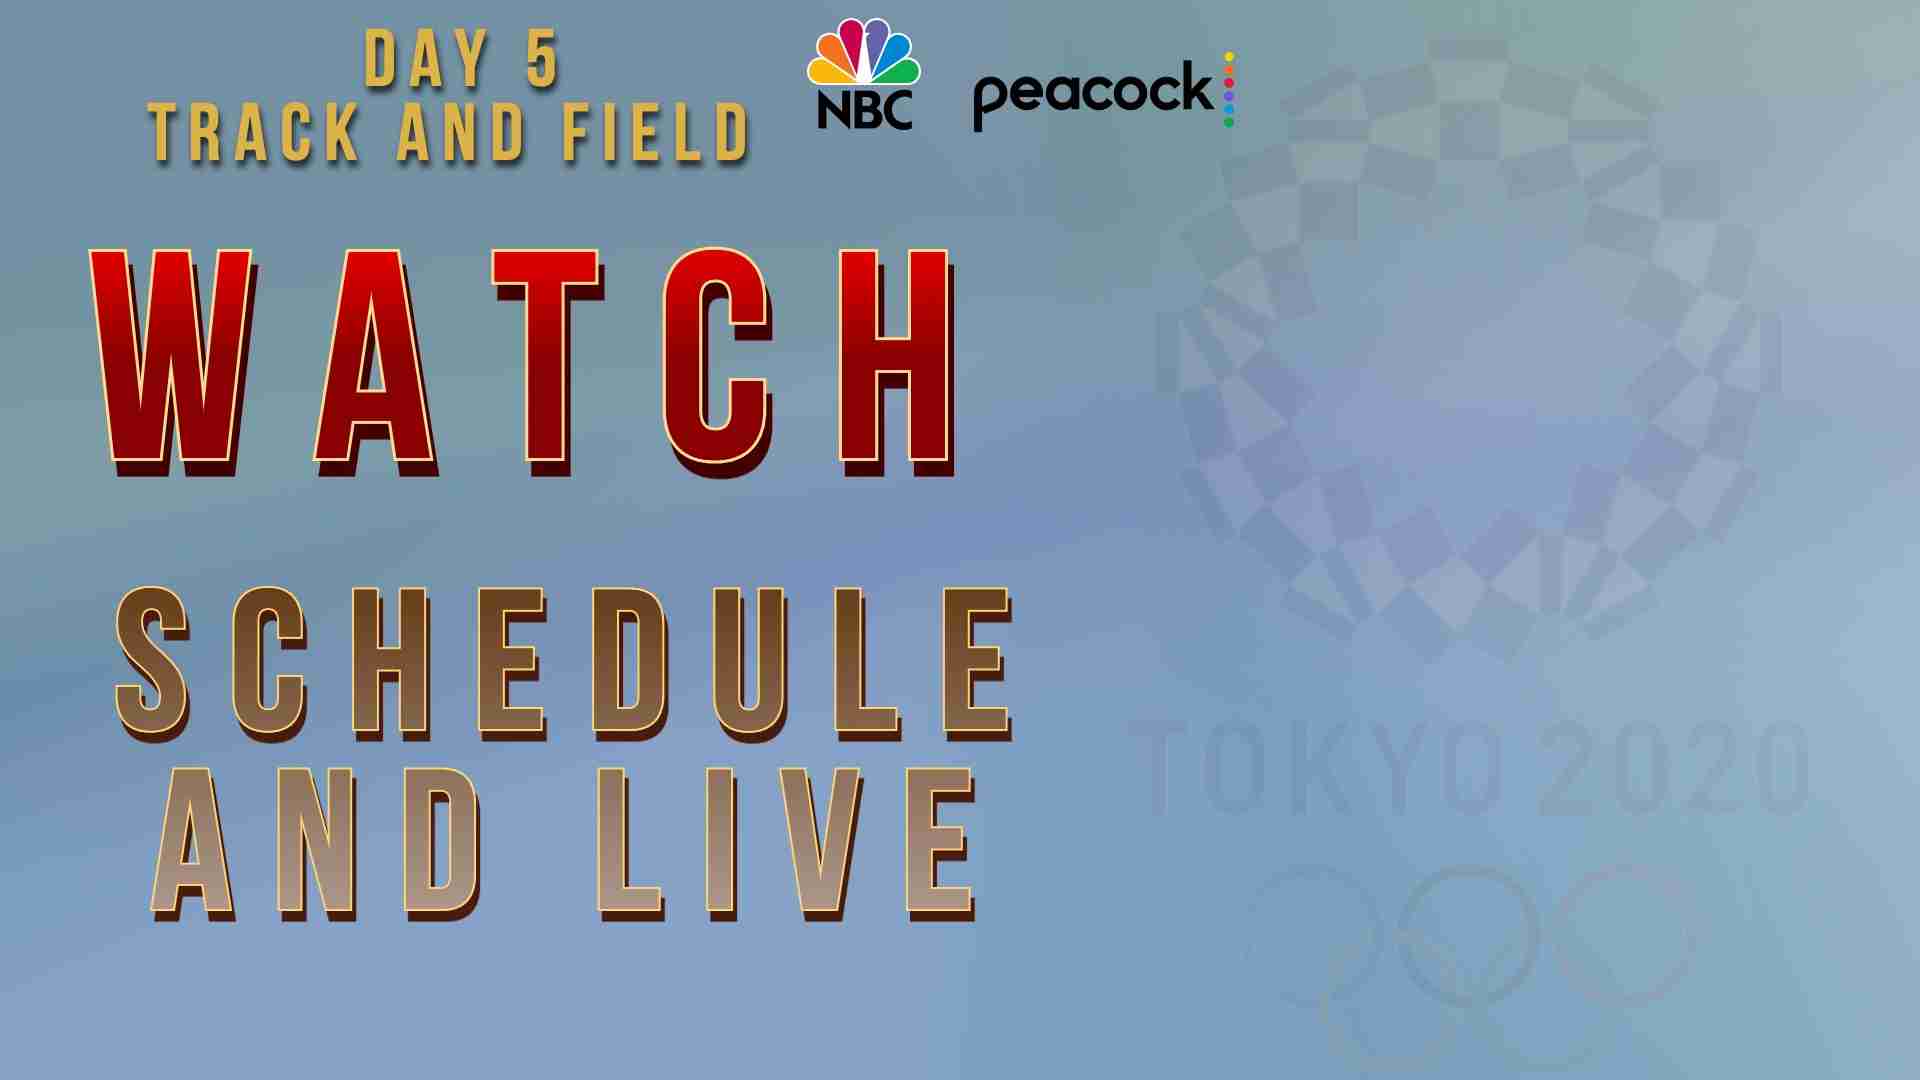 How to watch track and field on Day 5 at Tokyo 2020 Games